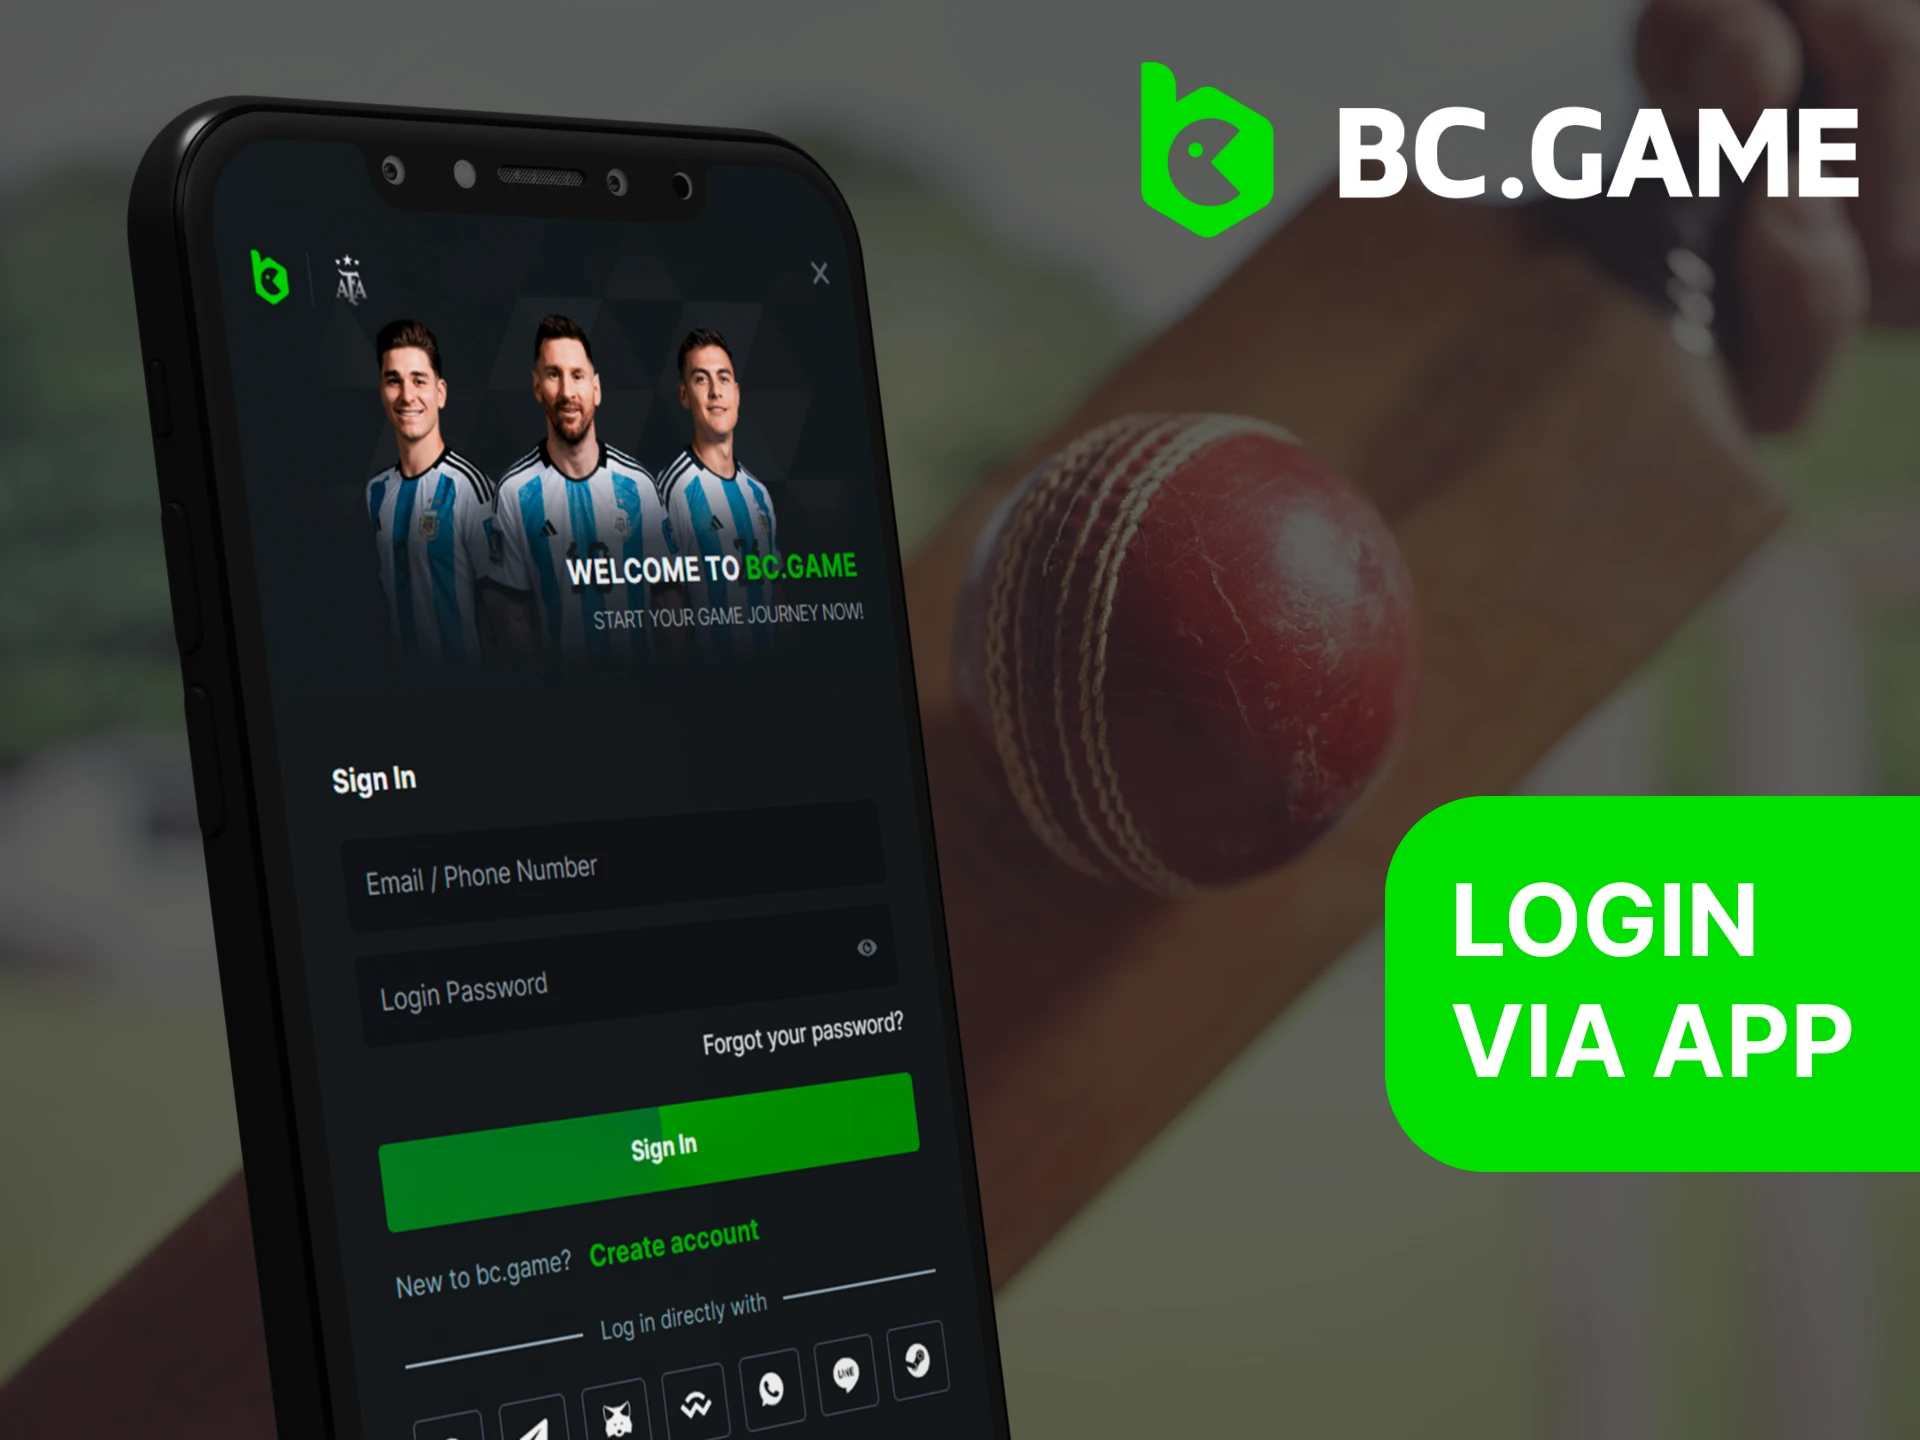 Log in to your BC Game account using the mobile app.